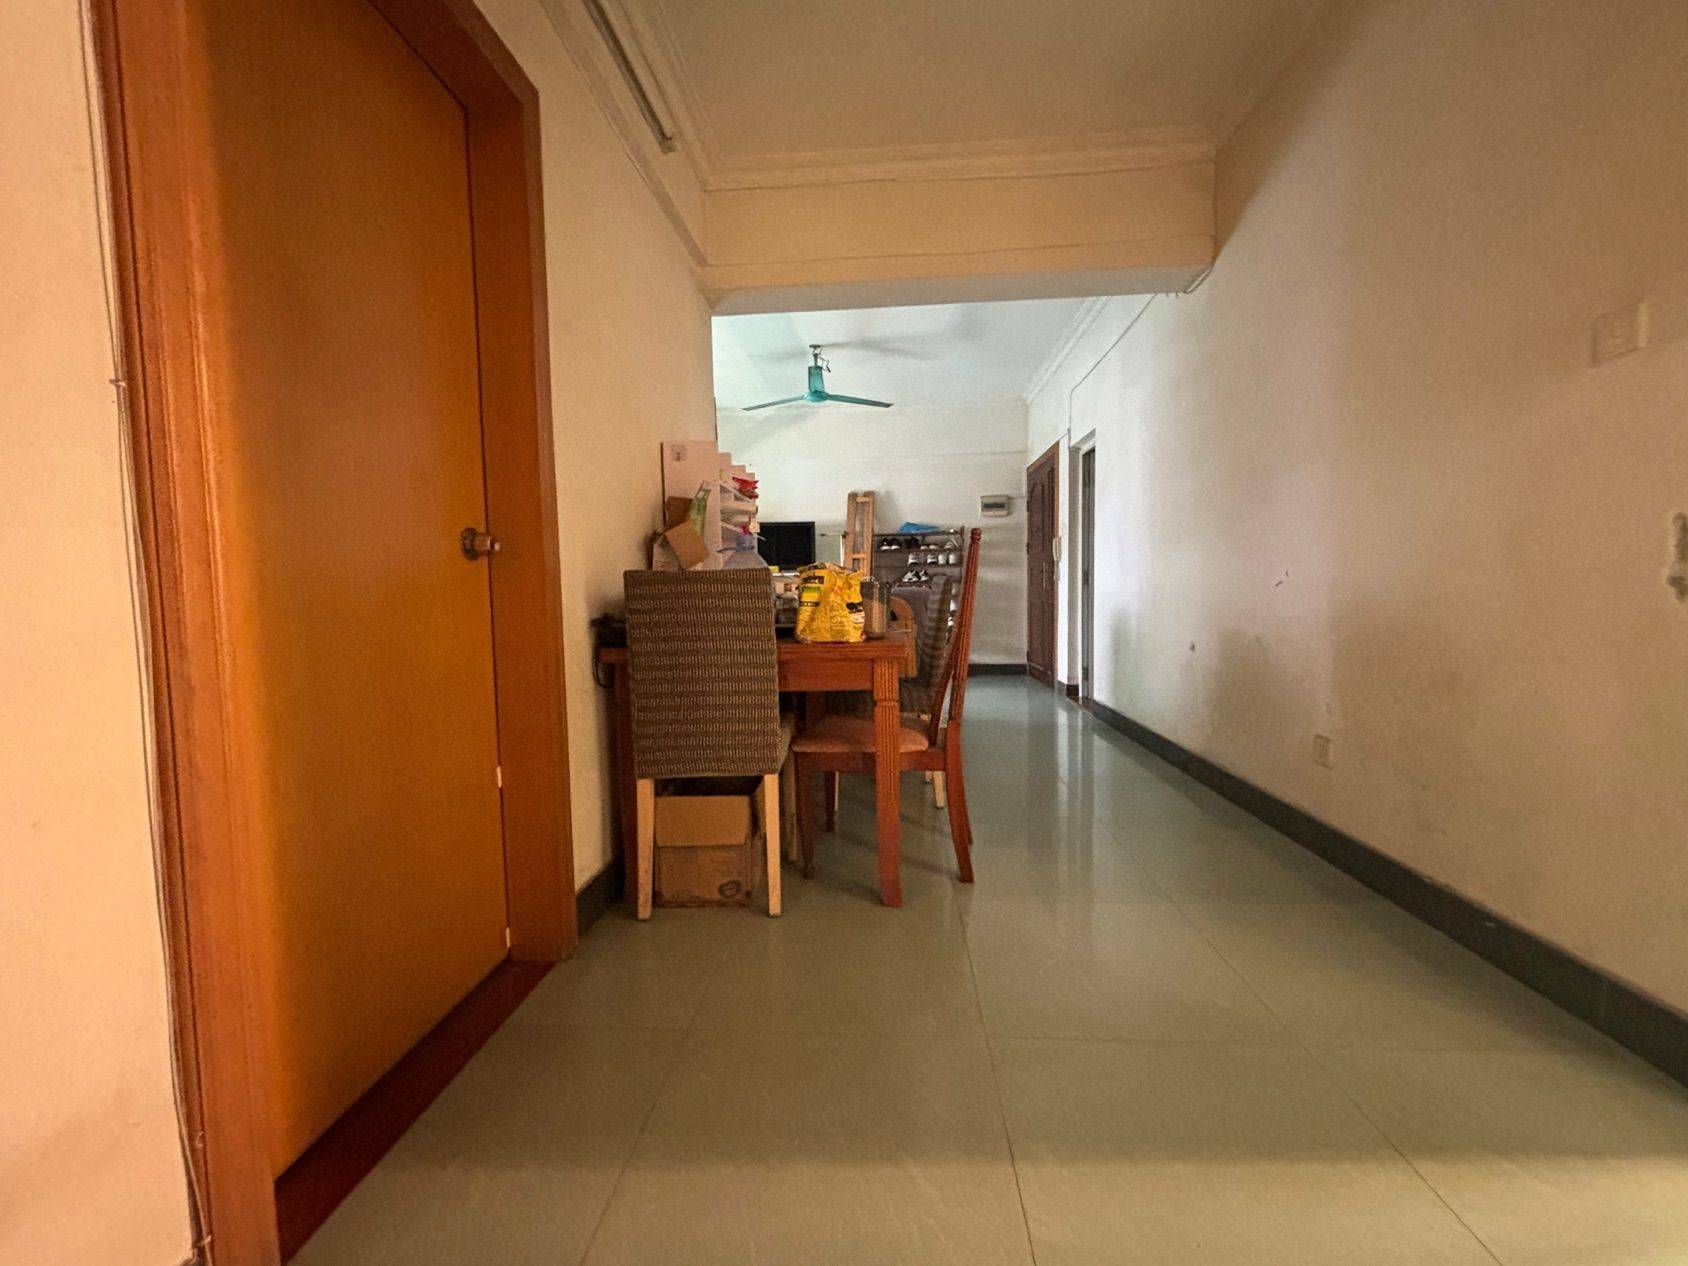 Guangzhou-Tianhe-Cozy Home,Clean&Comfy,No Gender Limit,Hustle & Bustle,“Friends”,Chilled